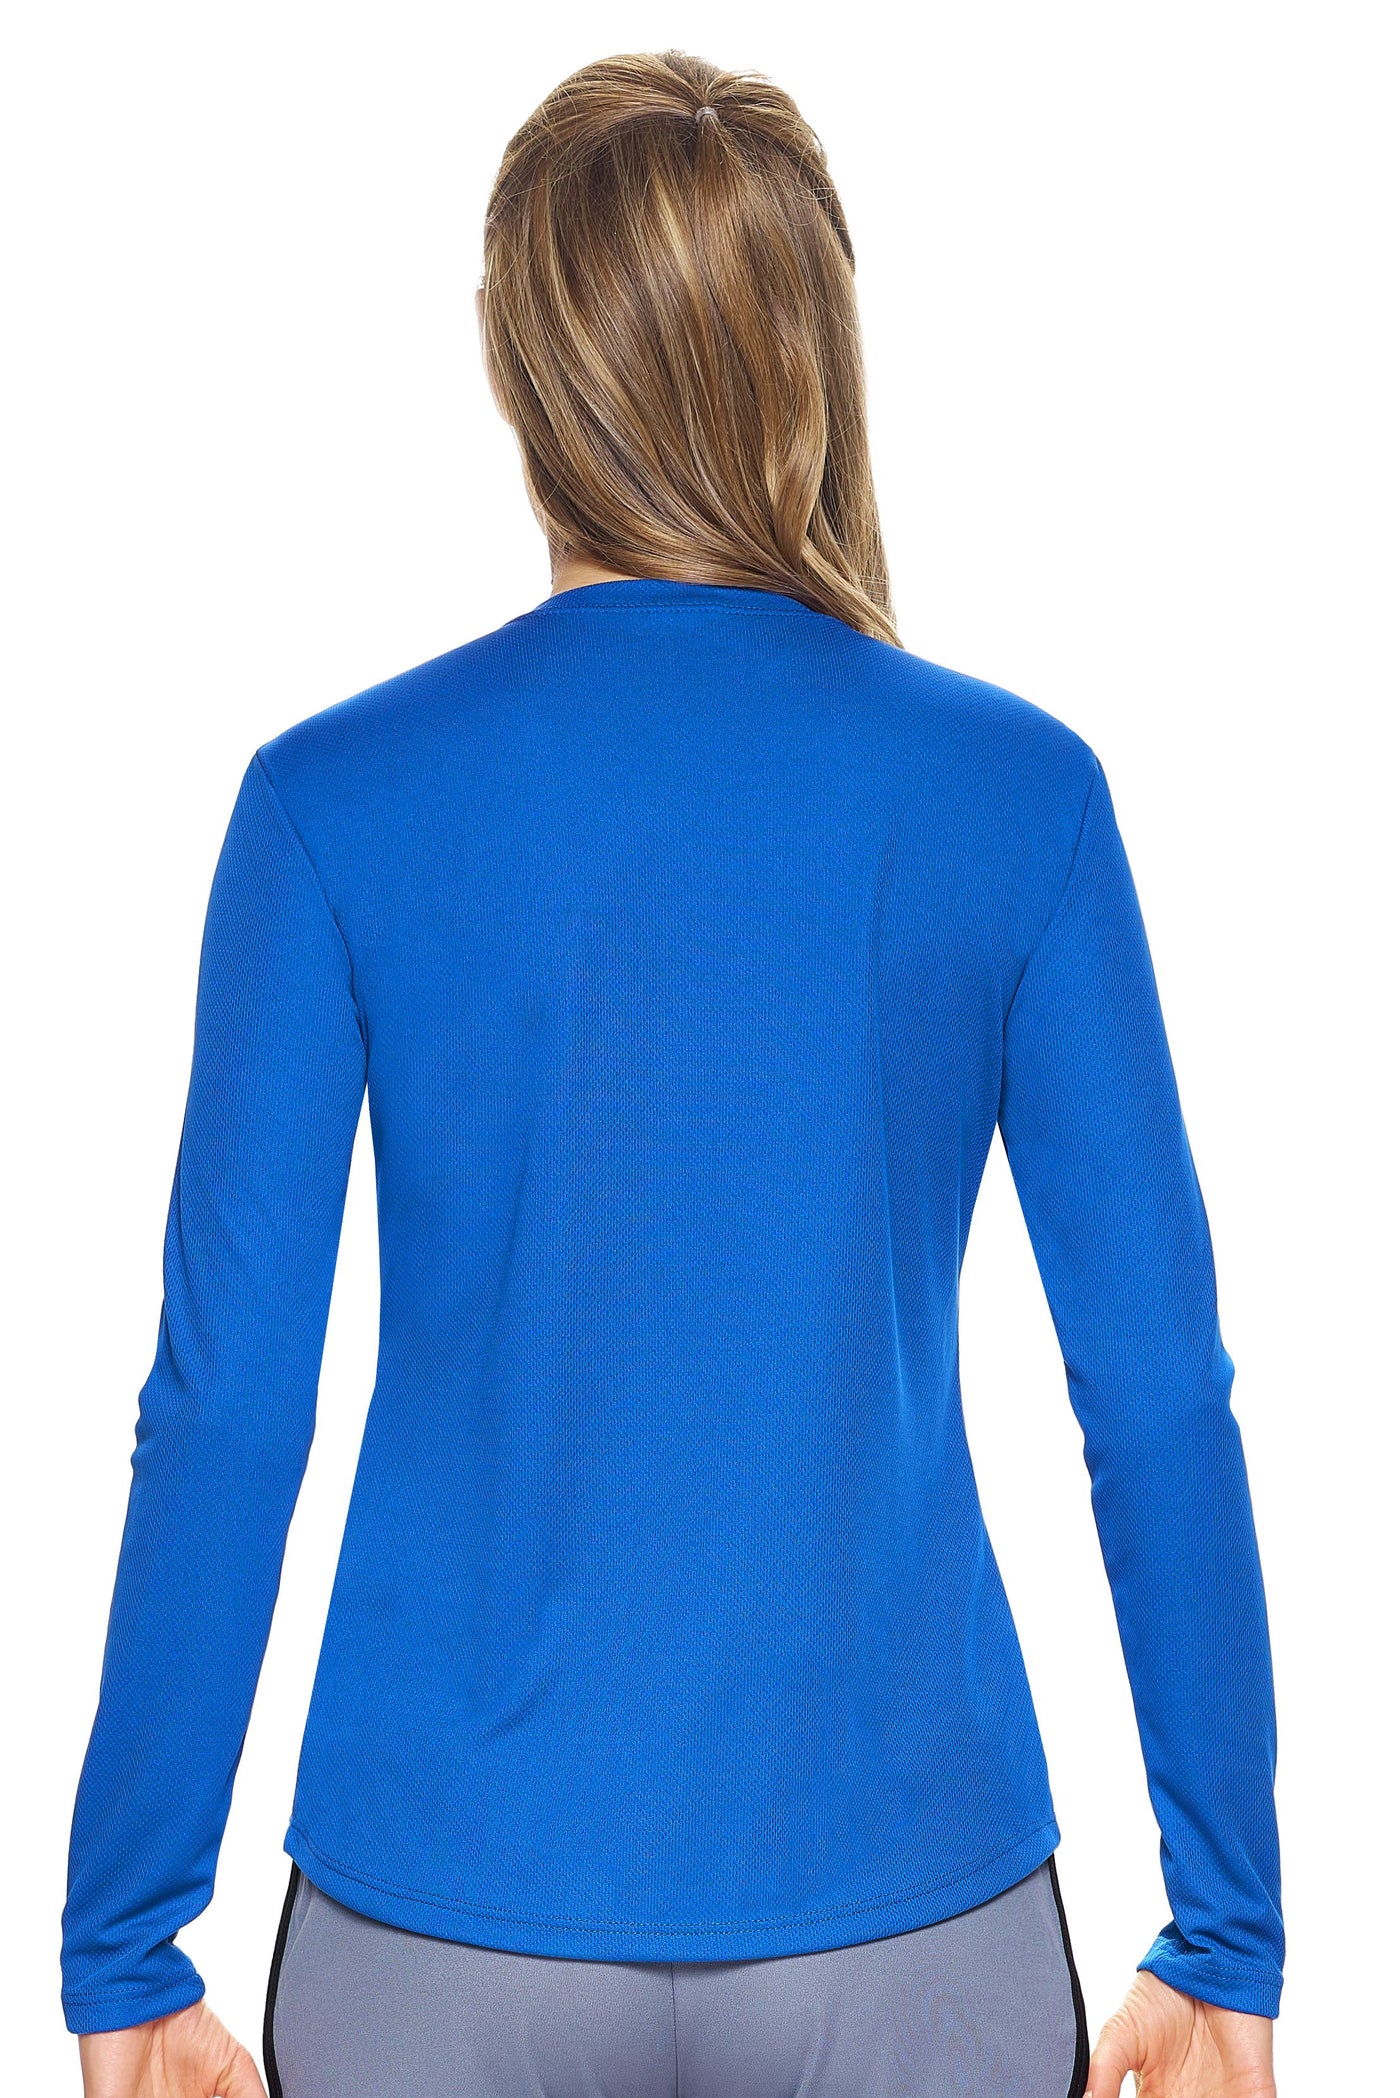 Expert Brand Retail Women's Long Sleeve Crewneck Tec Tee Made in USA Oxymesh royal blue 3#color_royal-blue